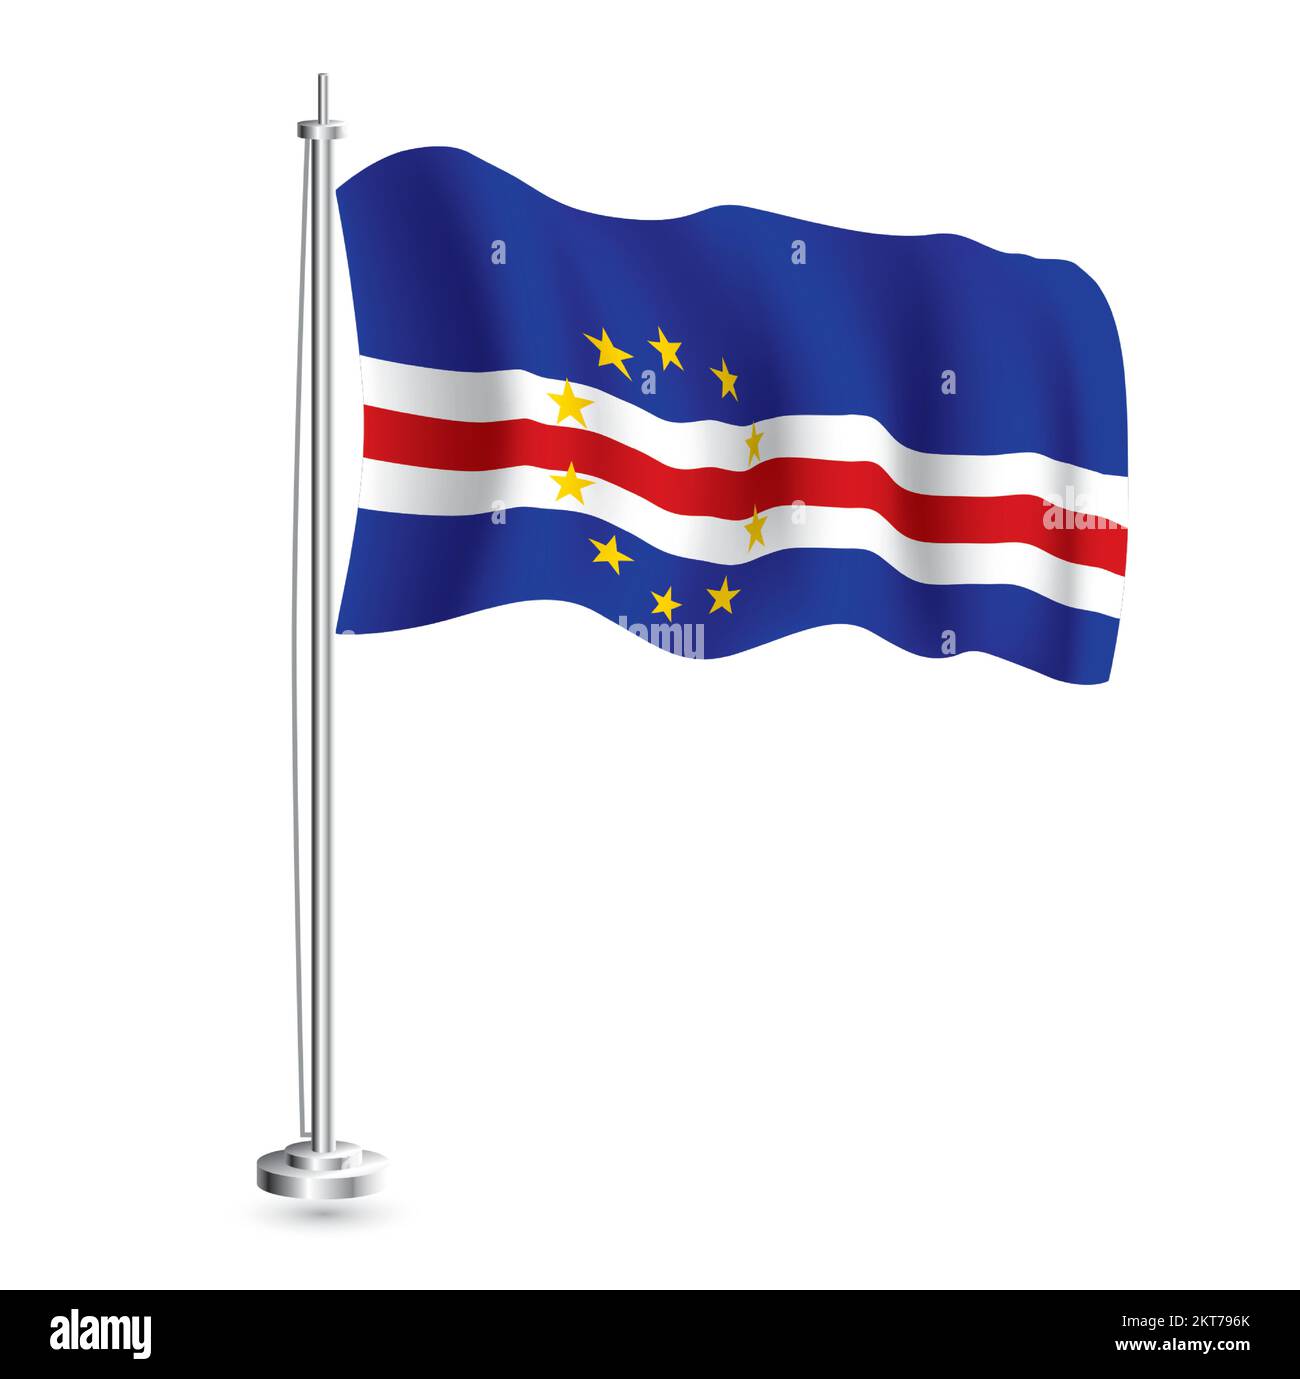 Cabo Verde Flag. Isolated Realistic Wave Flag of Cabo Verde Country on Flagpole. Vector Illustration. Stock Vector